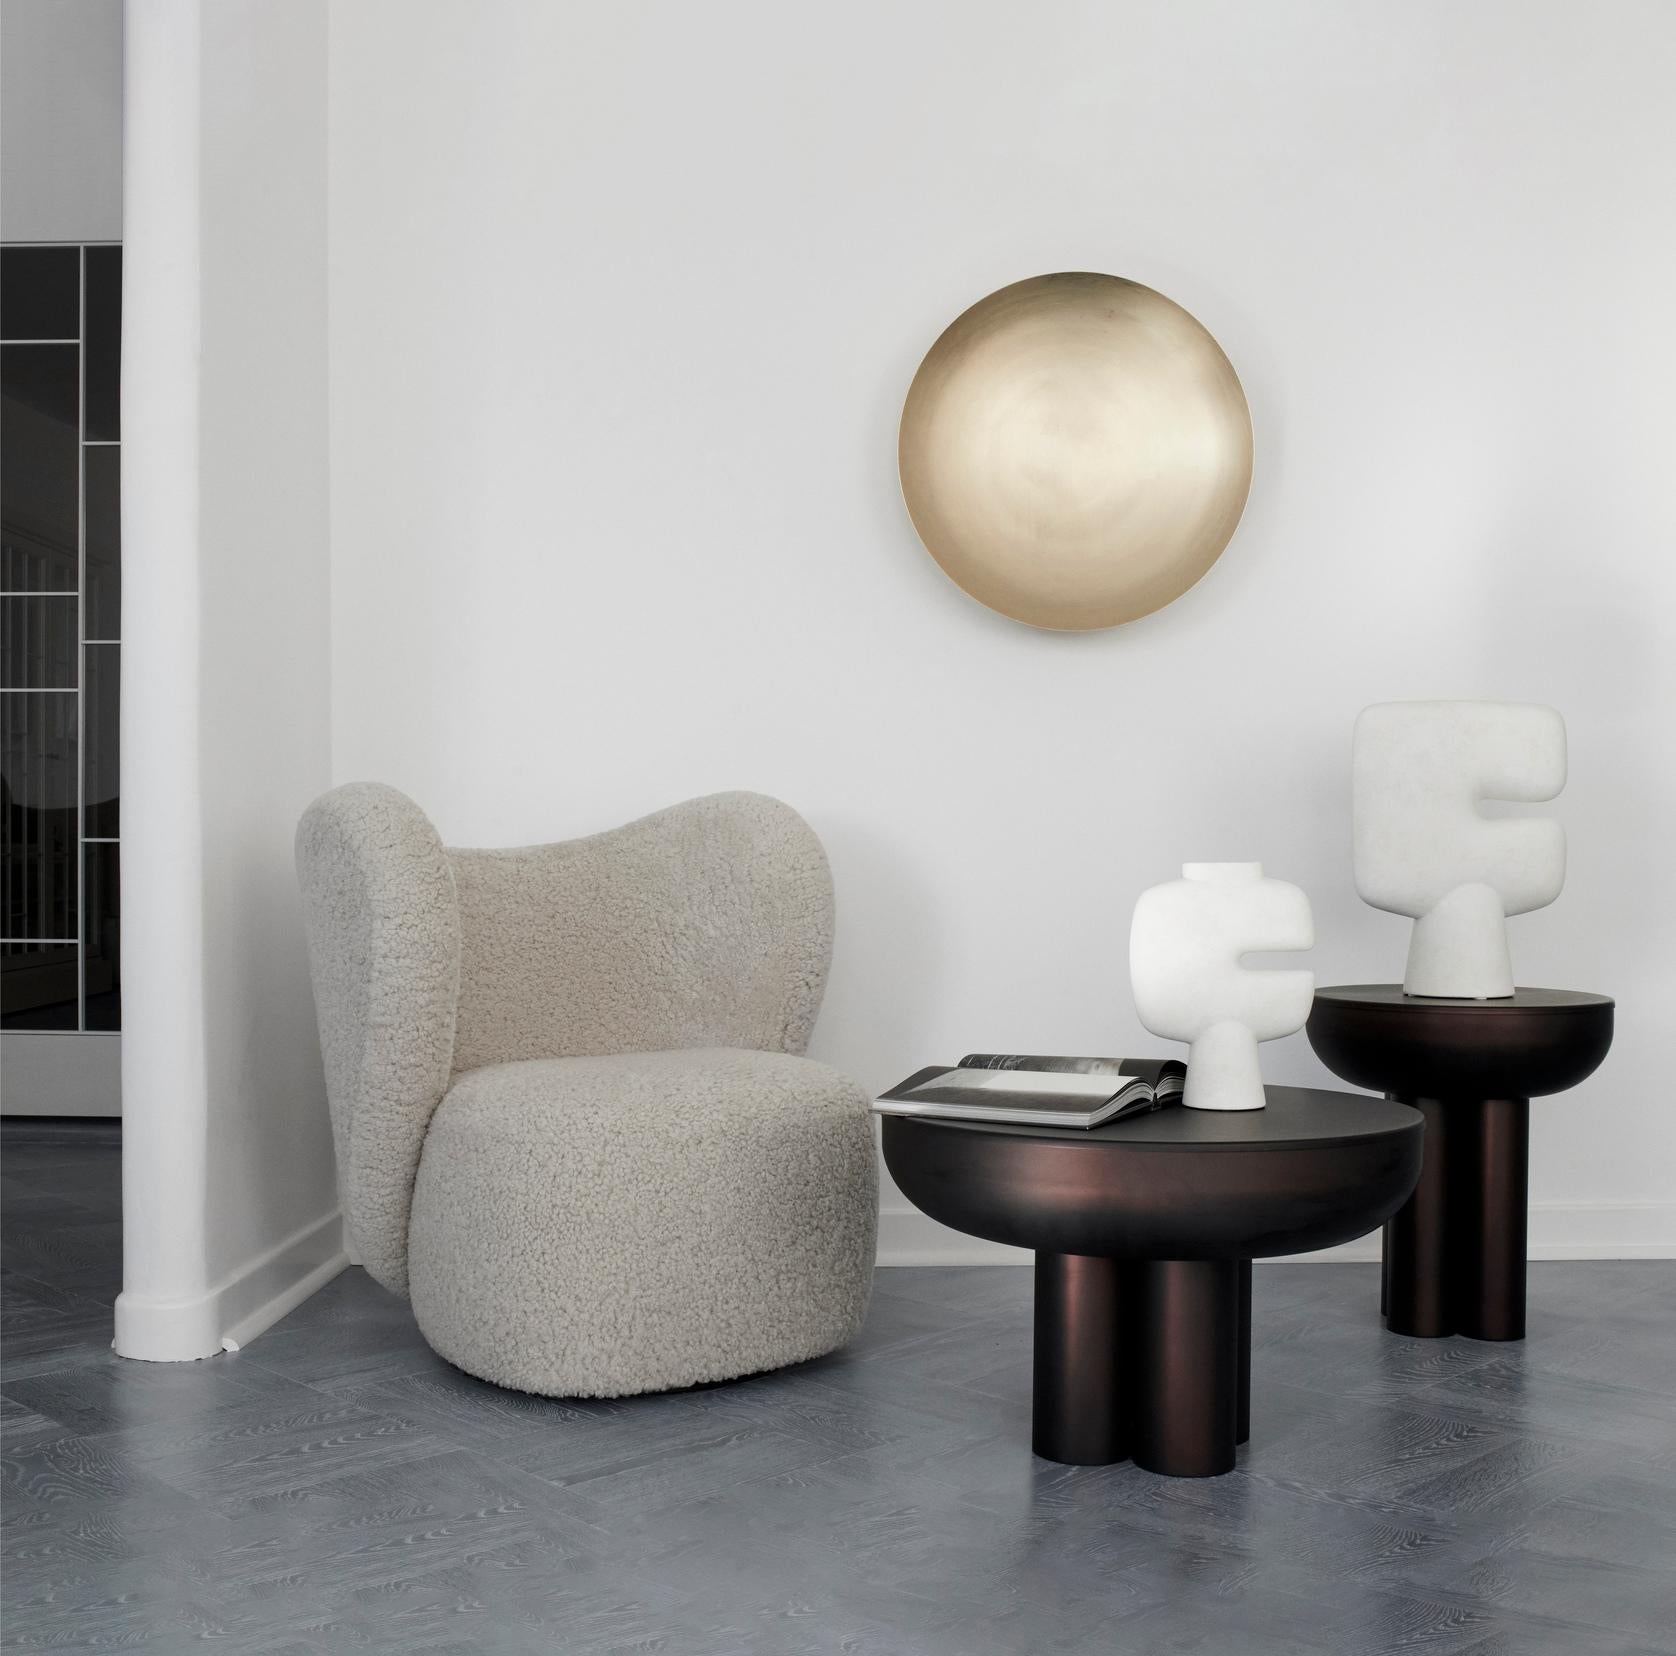 Coffee crown table tall by 101 Copenhagen.
Designed by Kristian Sofus Hansen & Tommy Hyldahl
Dimensions: L45 / W45 /H50 cm
Materials: fiber concrete

The collection of tables entitled Crown is cast in one piece formed as a circular tabletop carried